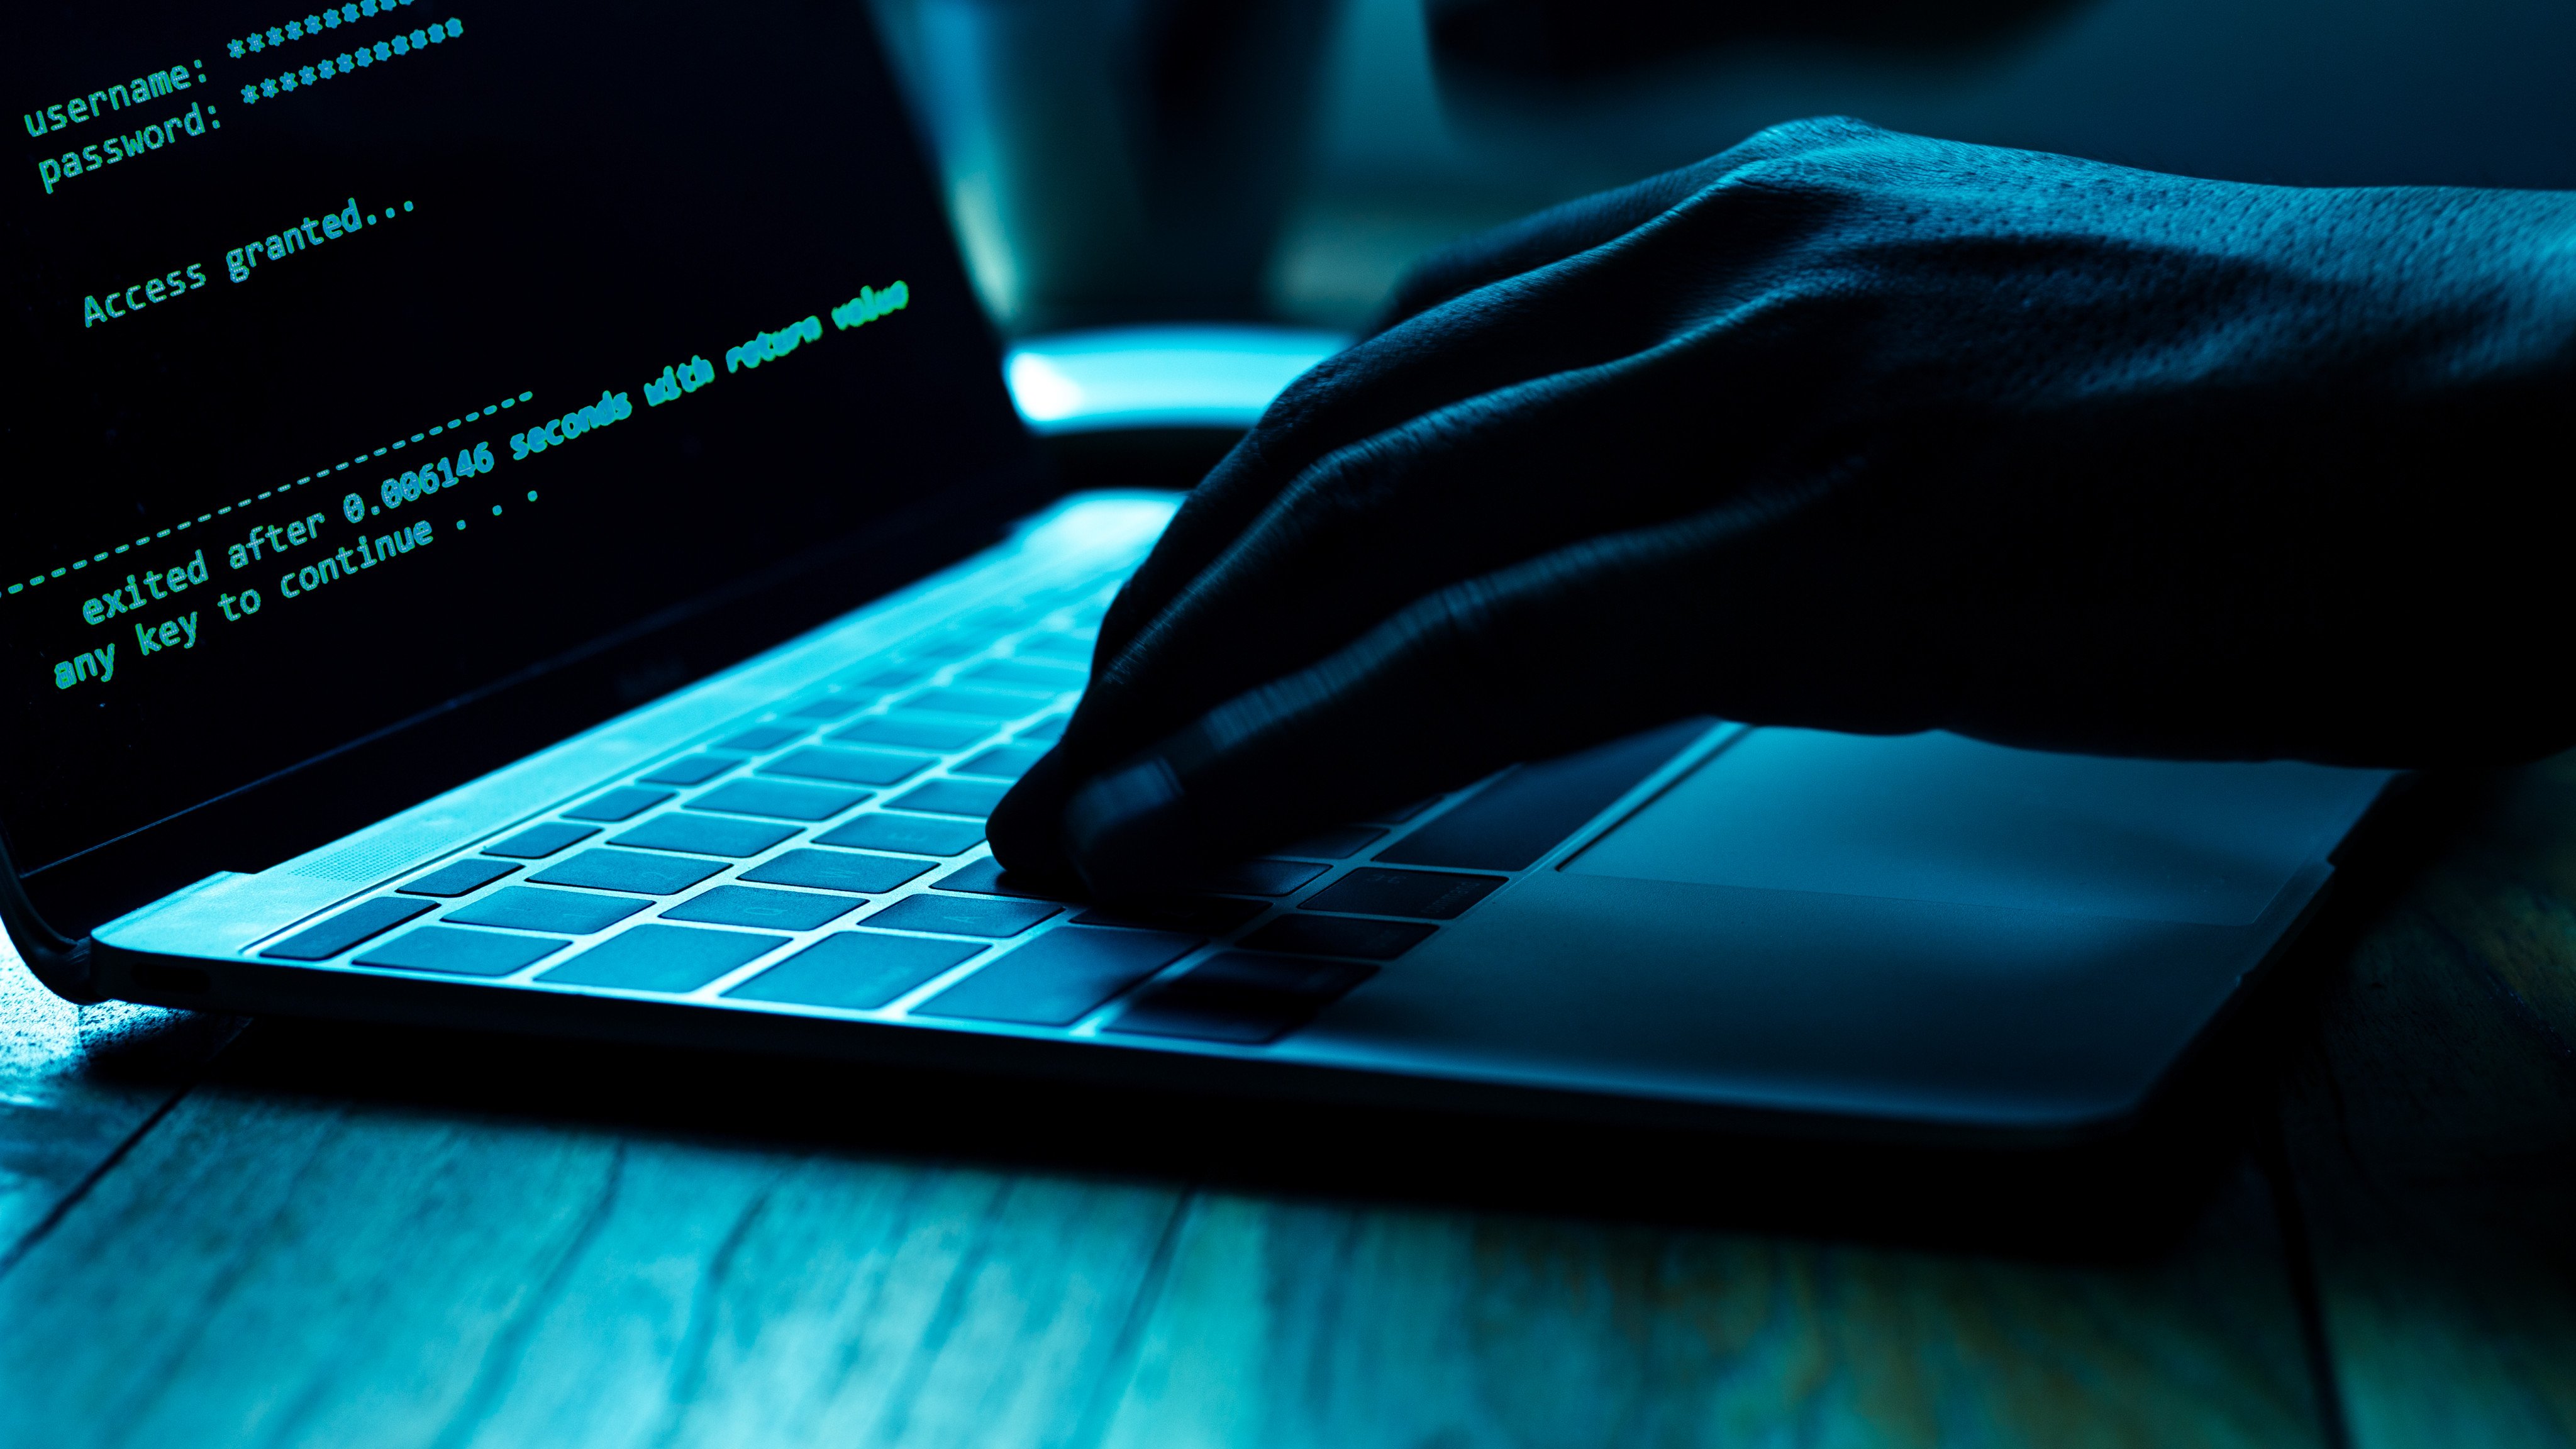 An unknown ransomware group had threatened to leak the data by Saturday night if a US$500,000 demand was not met, according to the council chairman. Photo: Shutterstock 